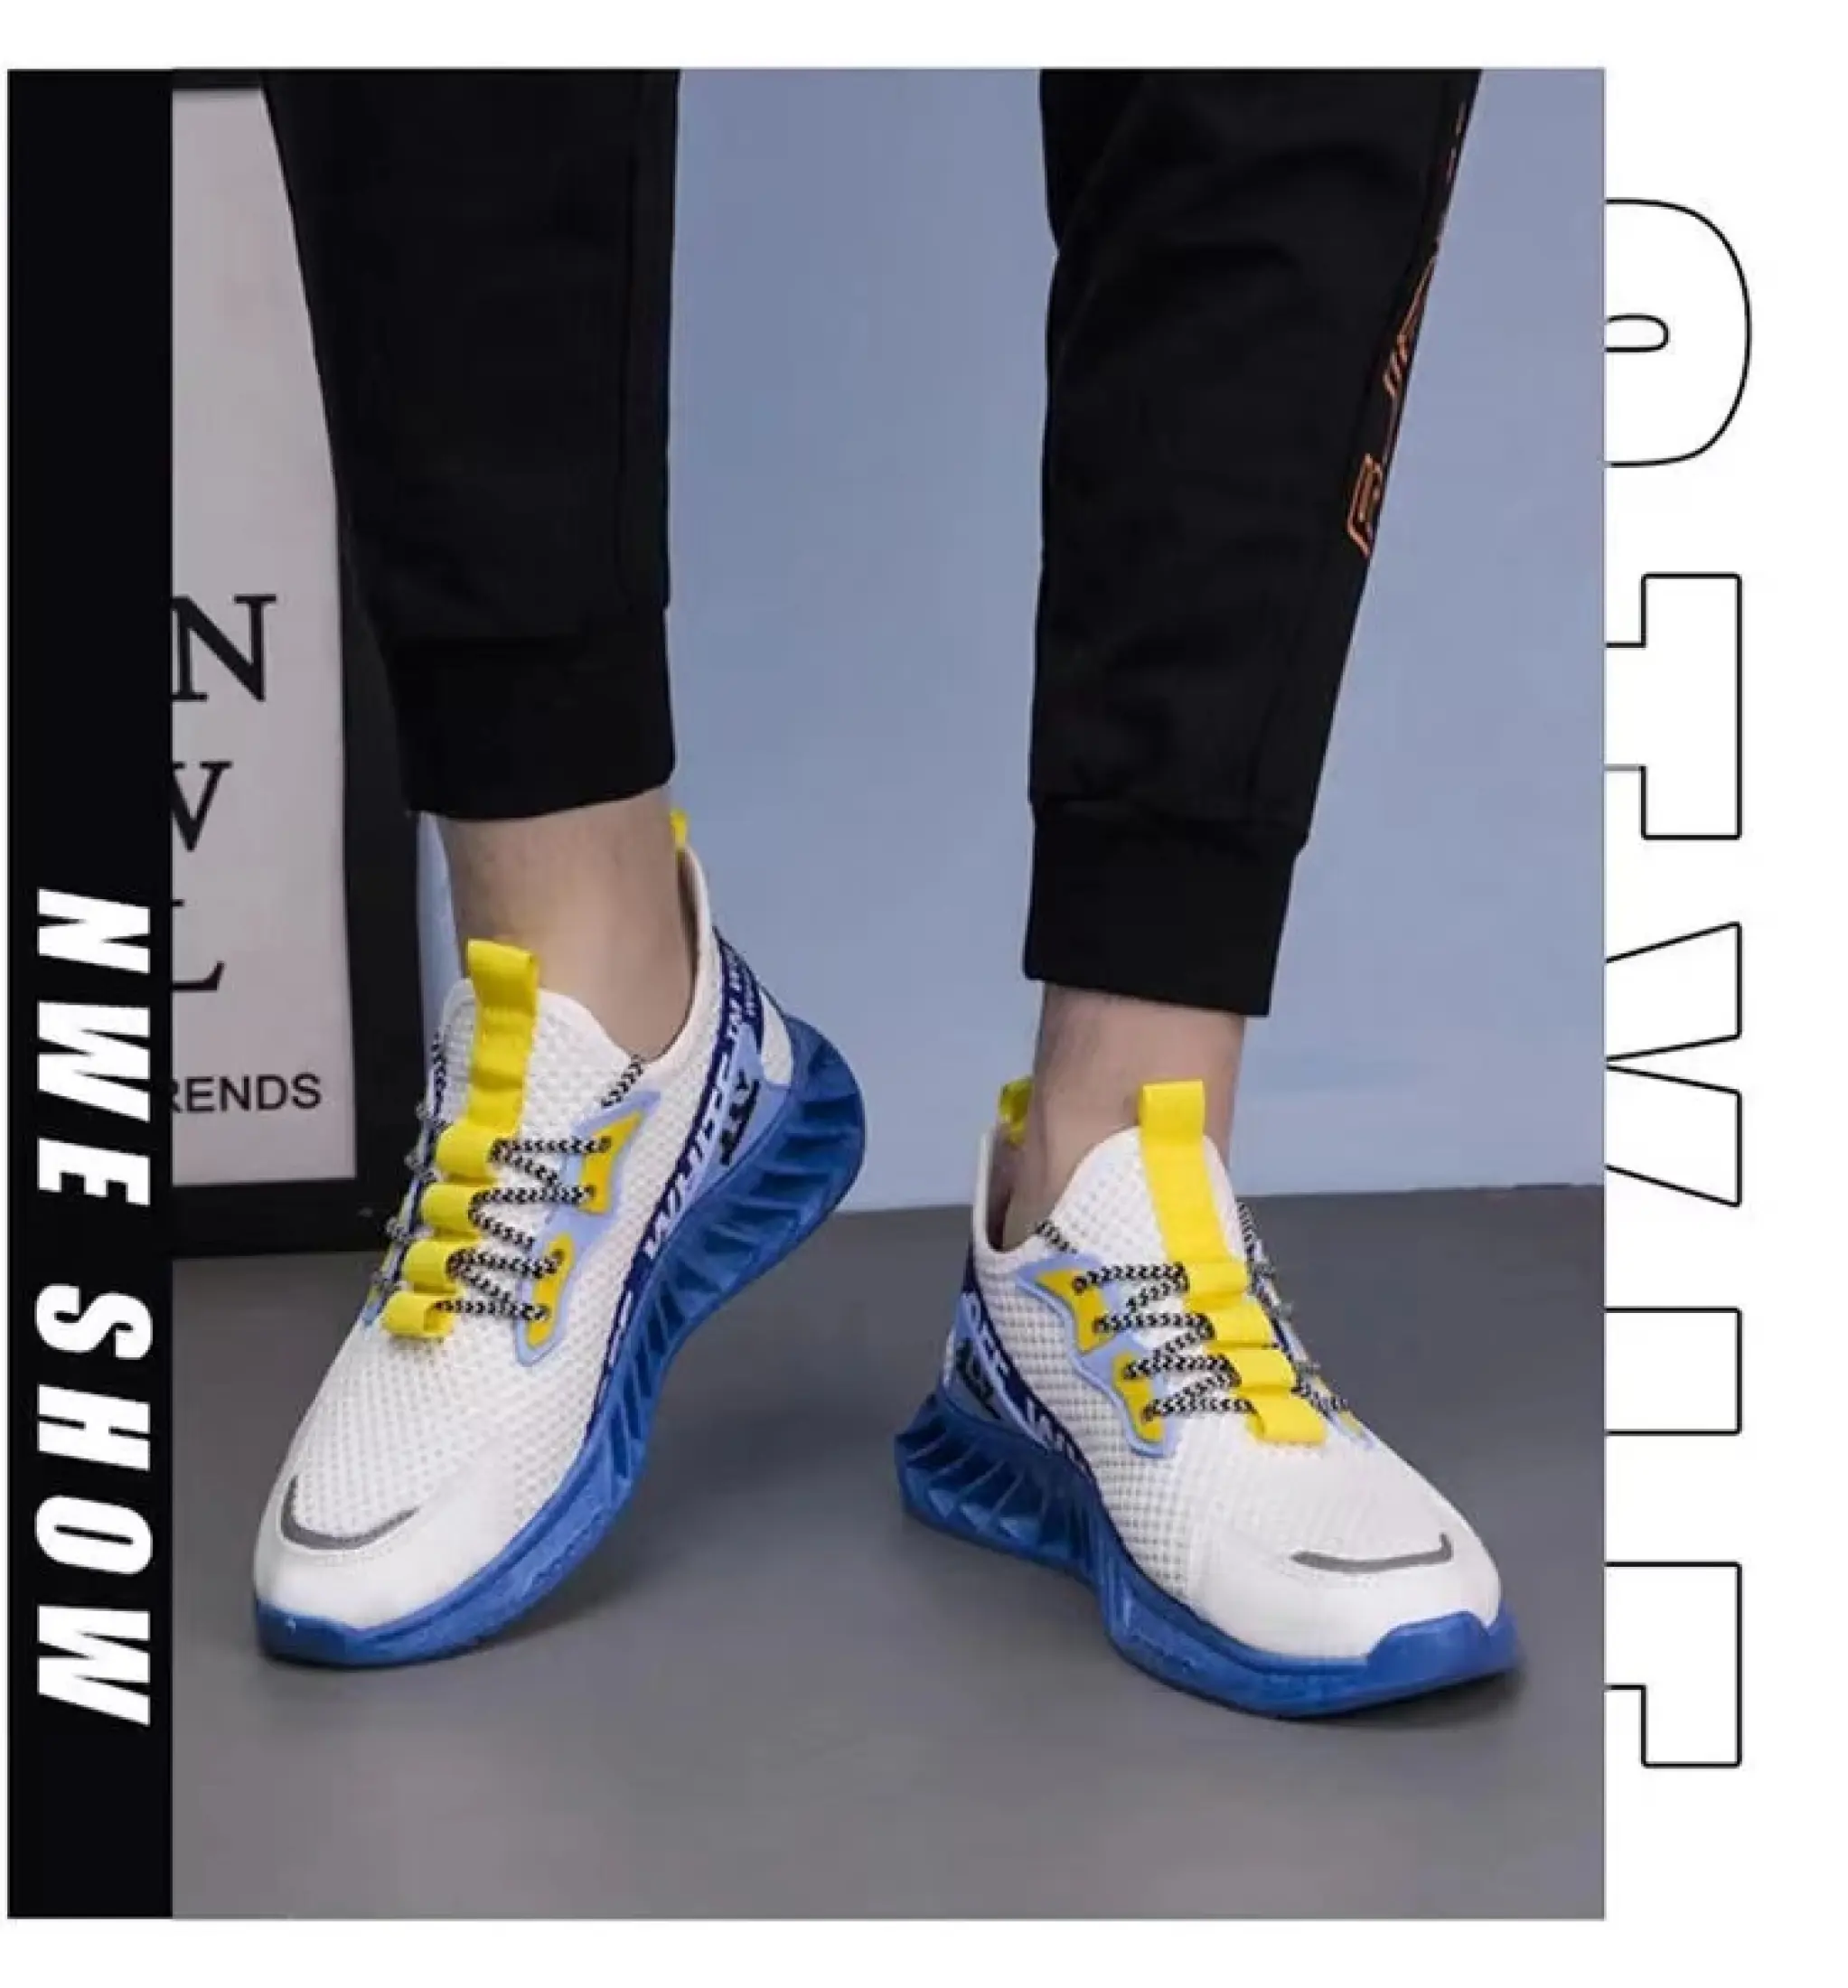 curry 4 yellow blue basketball shoes for and women 100 espadrille men rubber safety shoes for men yeezy shoes men vans old skool alpha bounce original men chunky